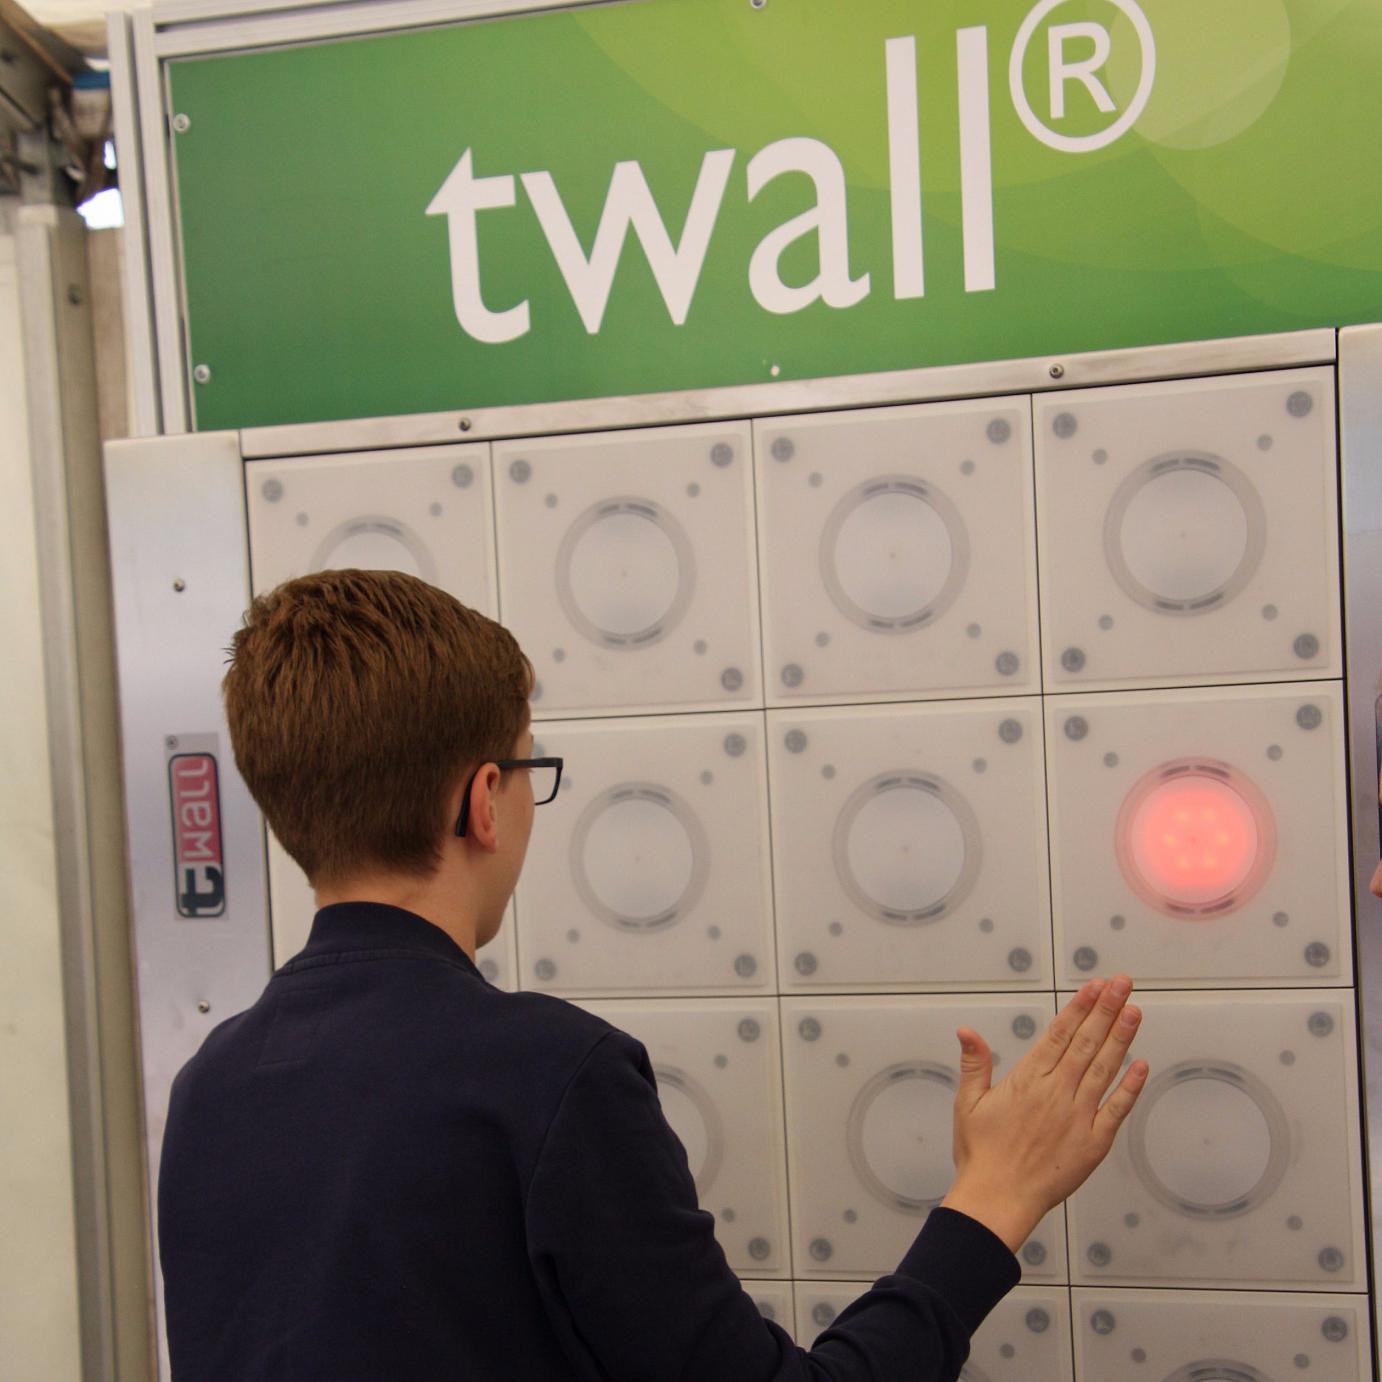 Twall 16 Reaktionswand